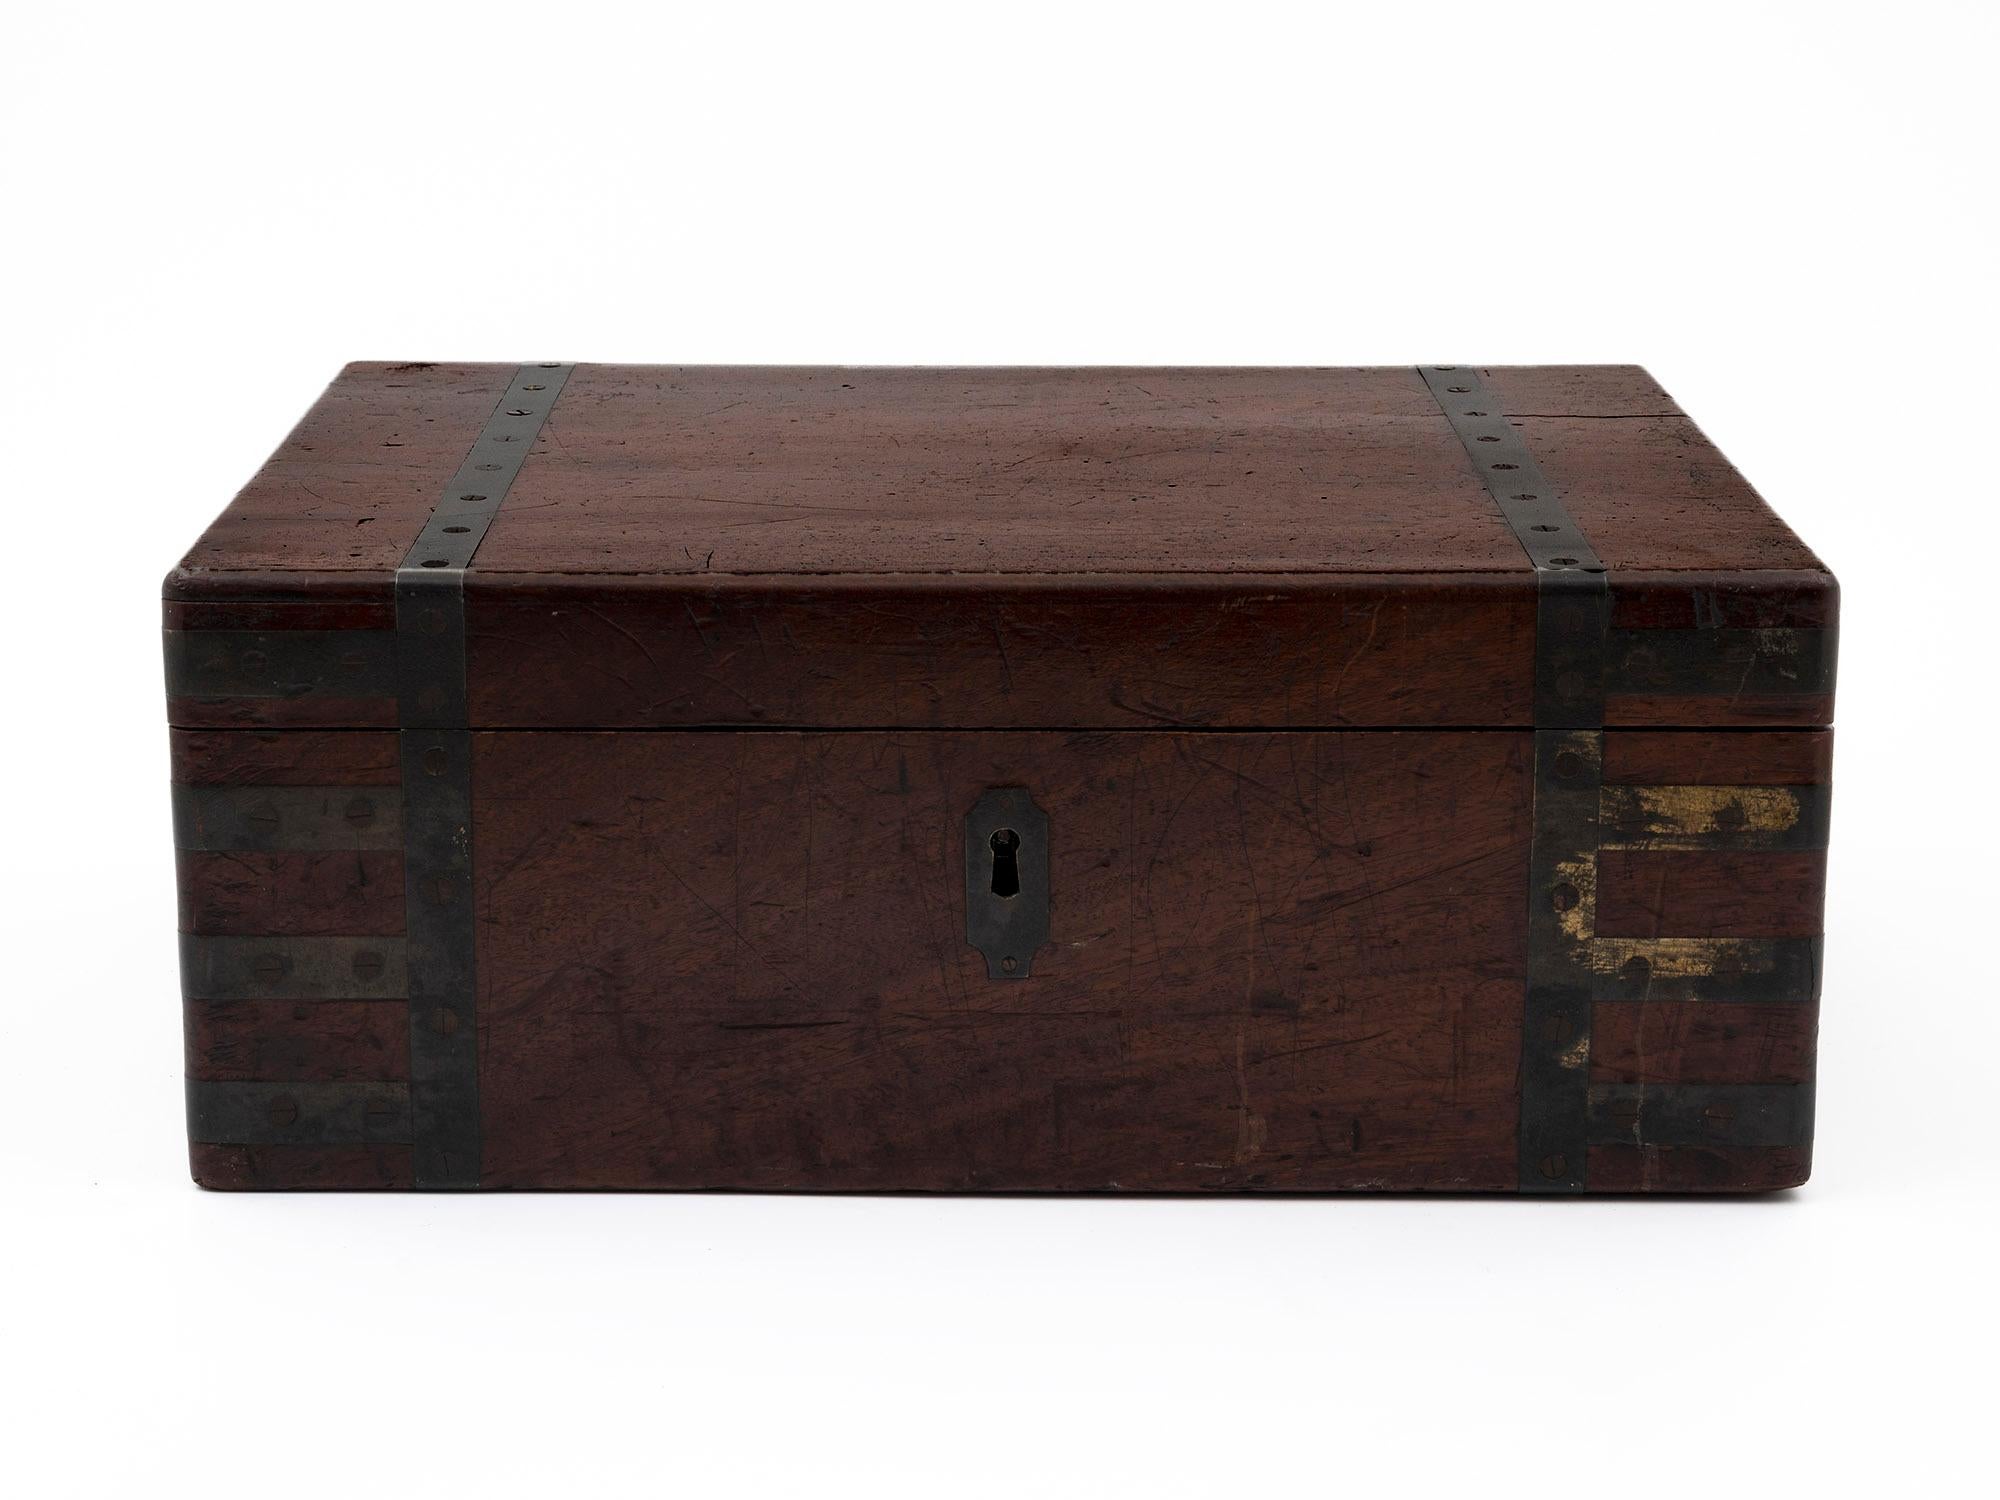 Antique military captain's writing box with brass strapping, secret compartment and special large steel key to secure the box for stability on the shores or military manoeuvres!

The magnificent box is constructed of dense solid Mahogany with